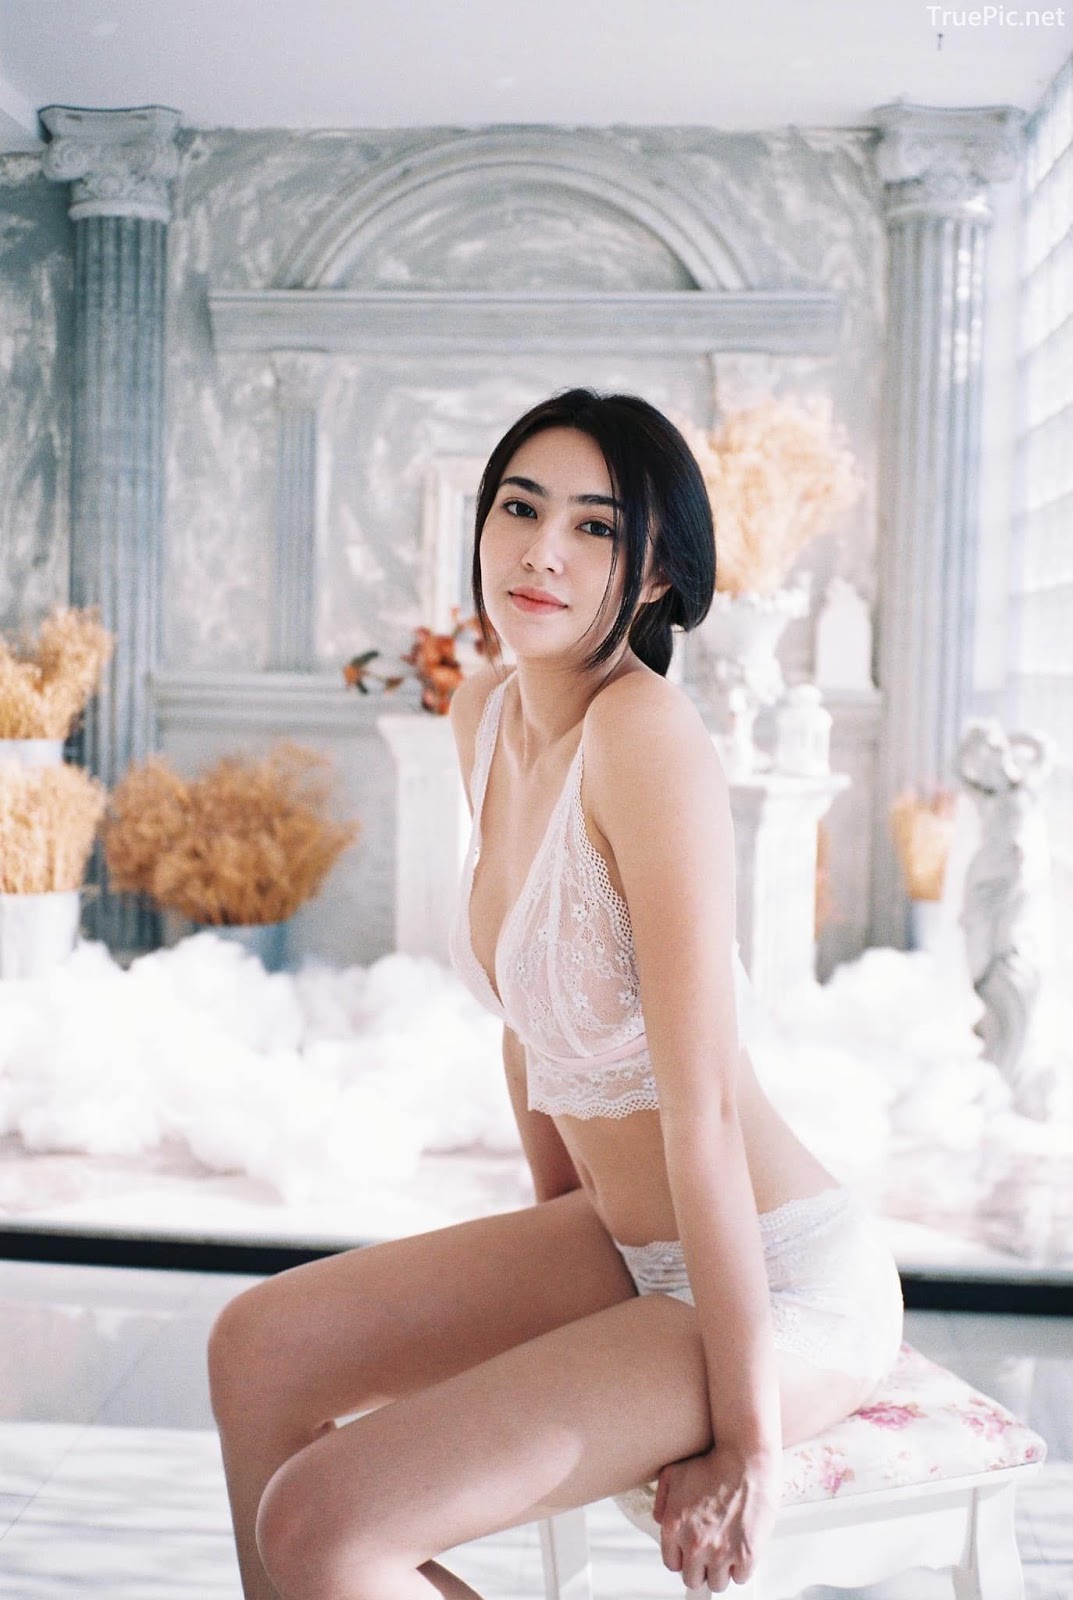 Thailand Hot model - Baifern Rinrucha Kamnark - Sexy in Transparent Lace Lingerie - TruePic.net - Picture 13